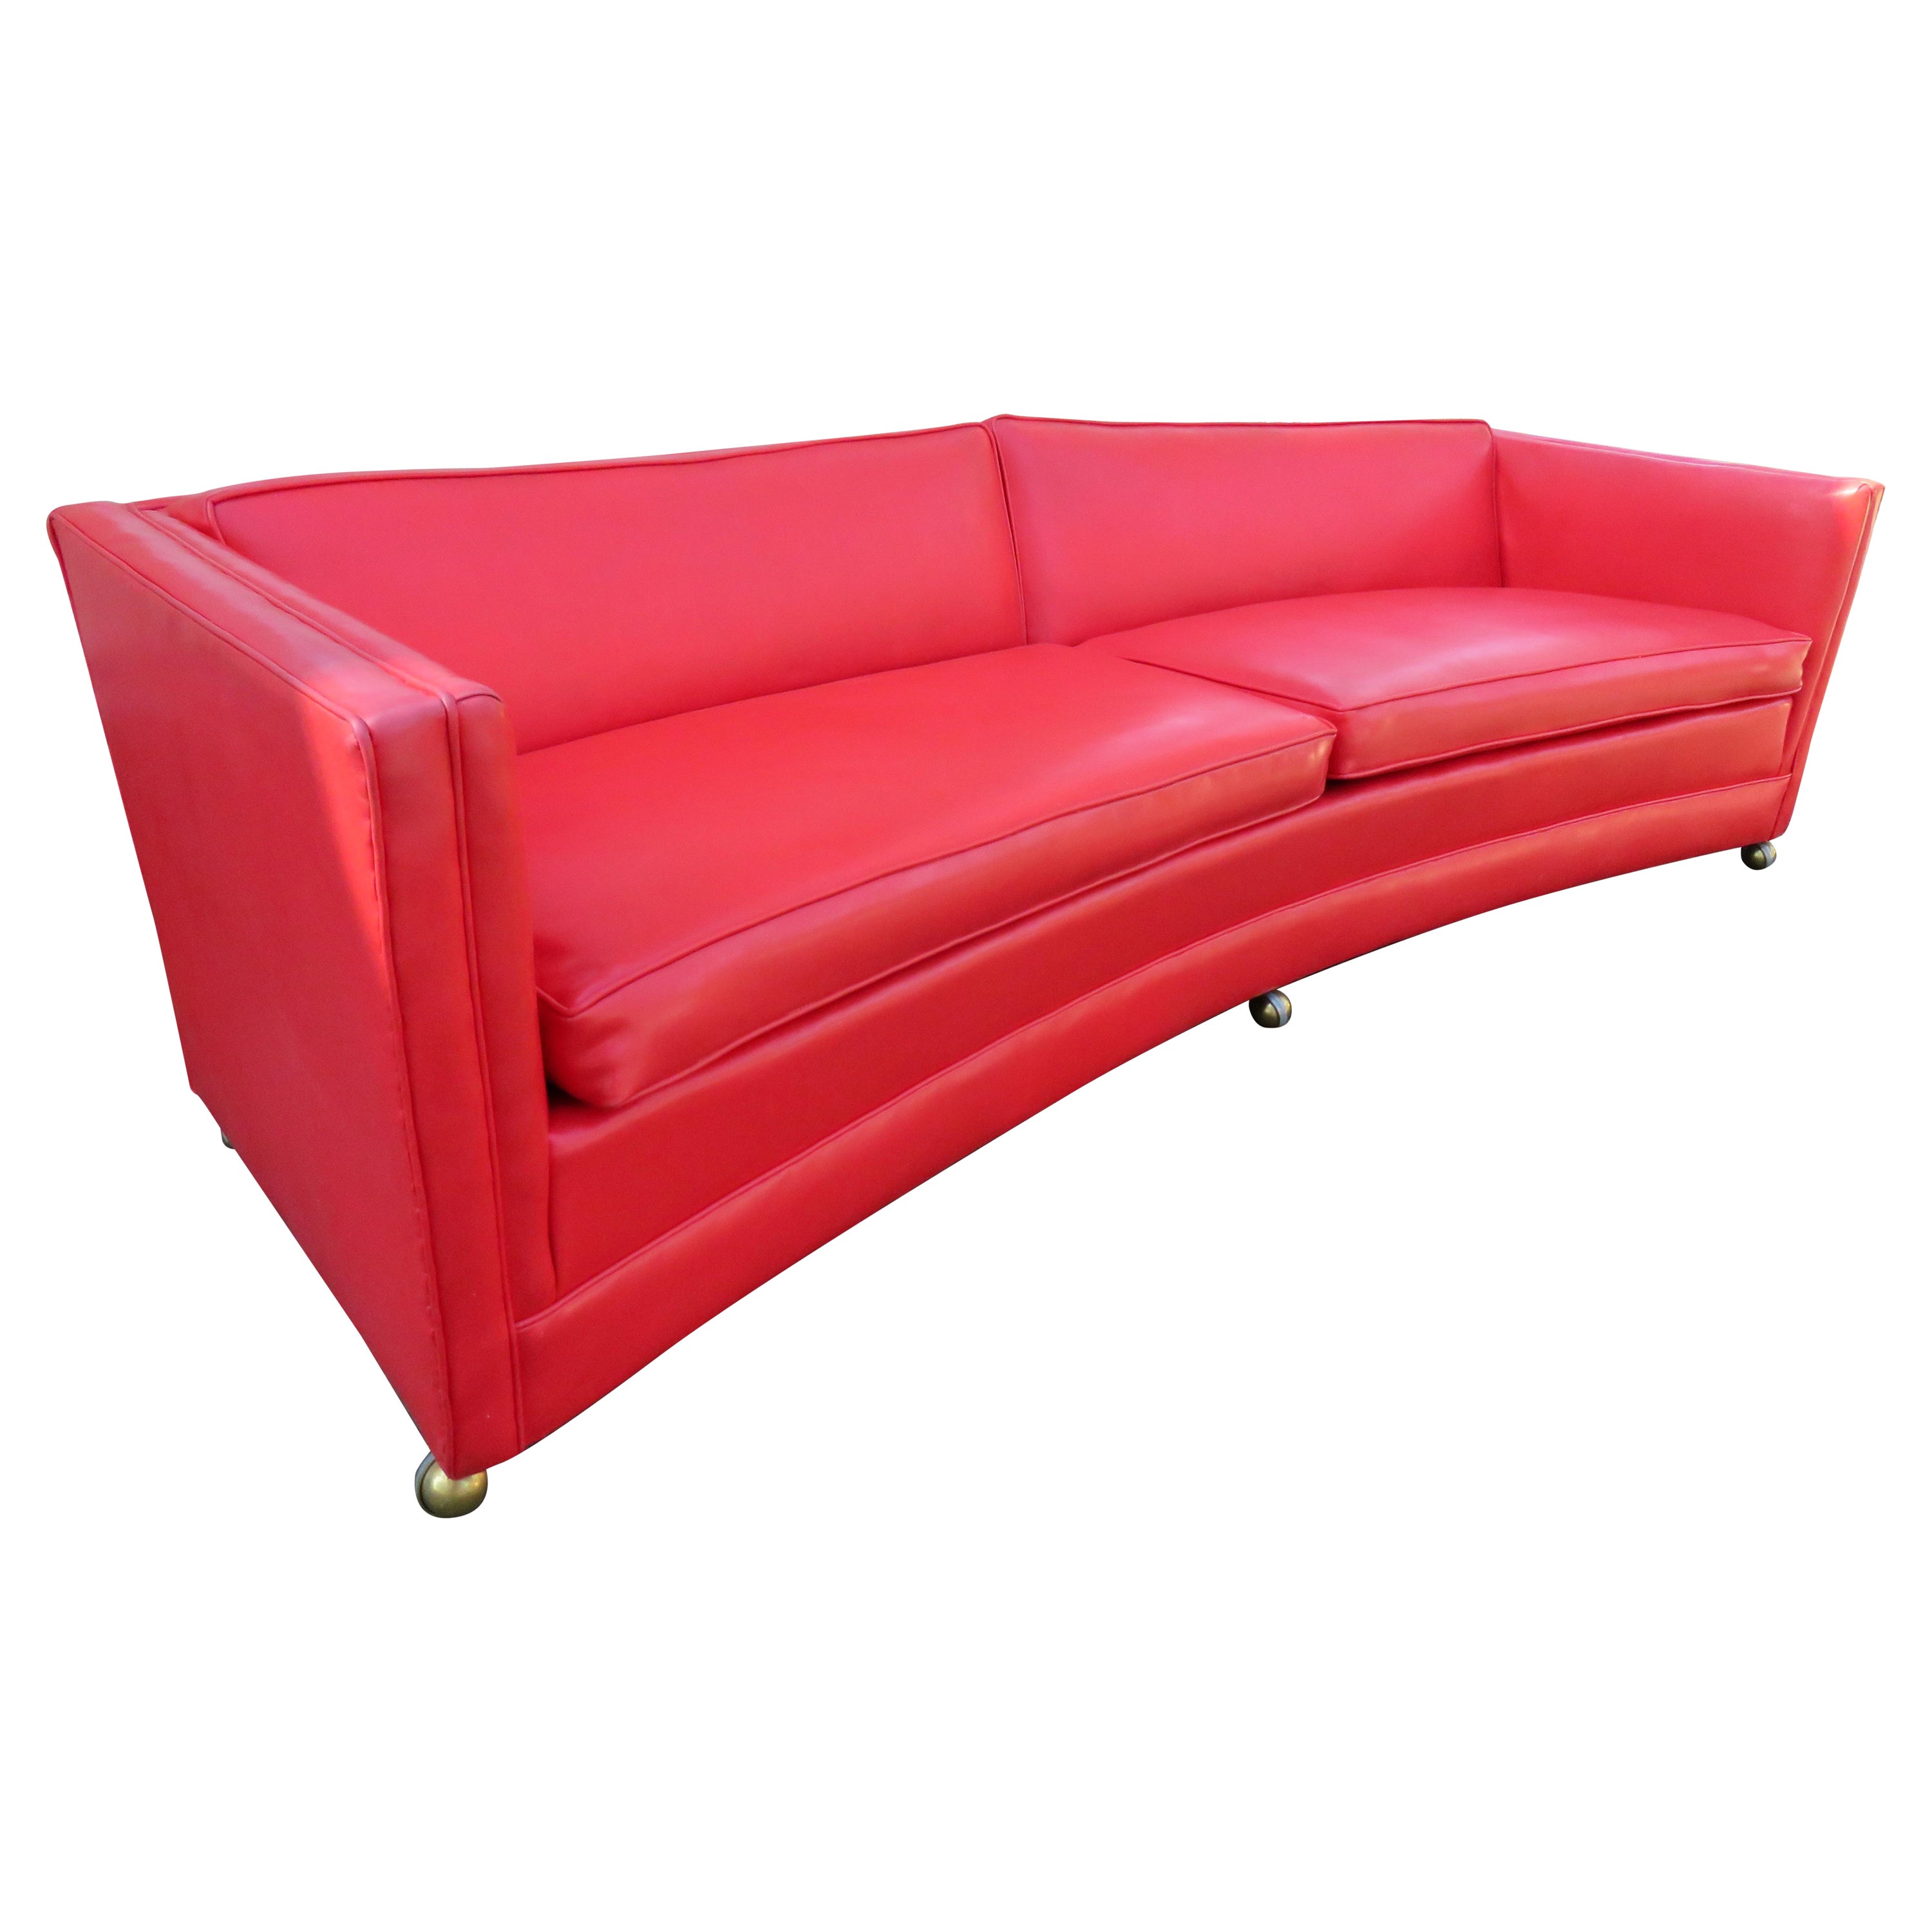 Handsome Harvey Probber Style Curved Even Arm Sofa Mid-Century Modern